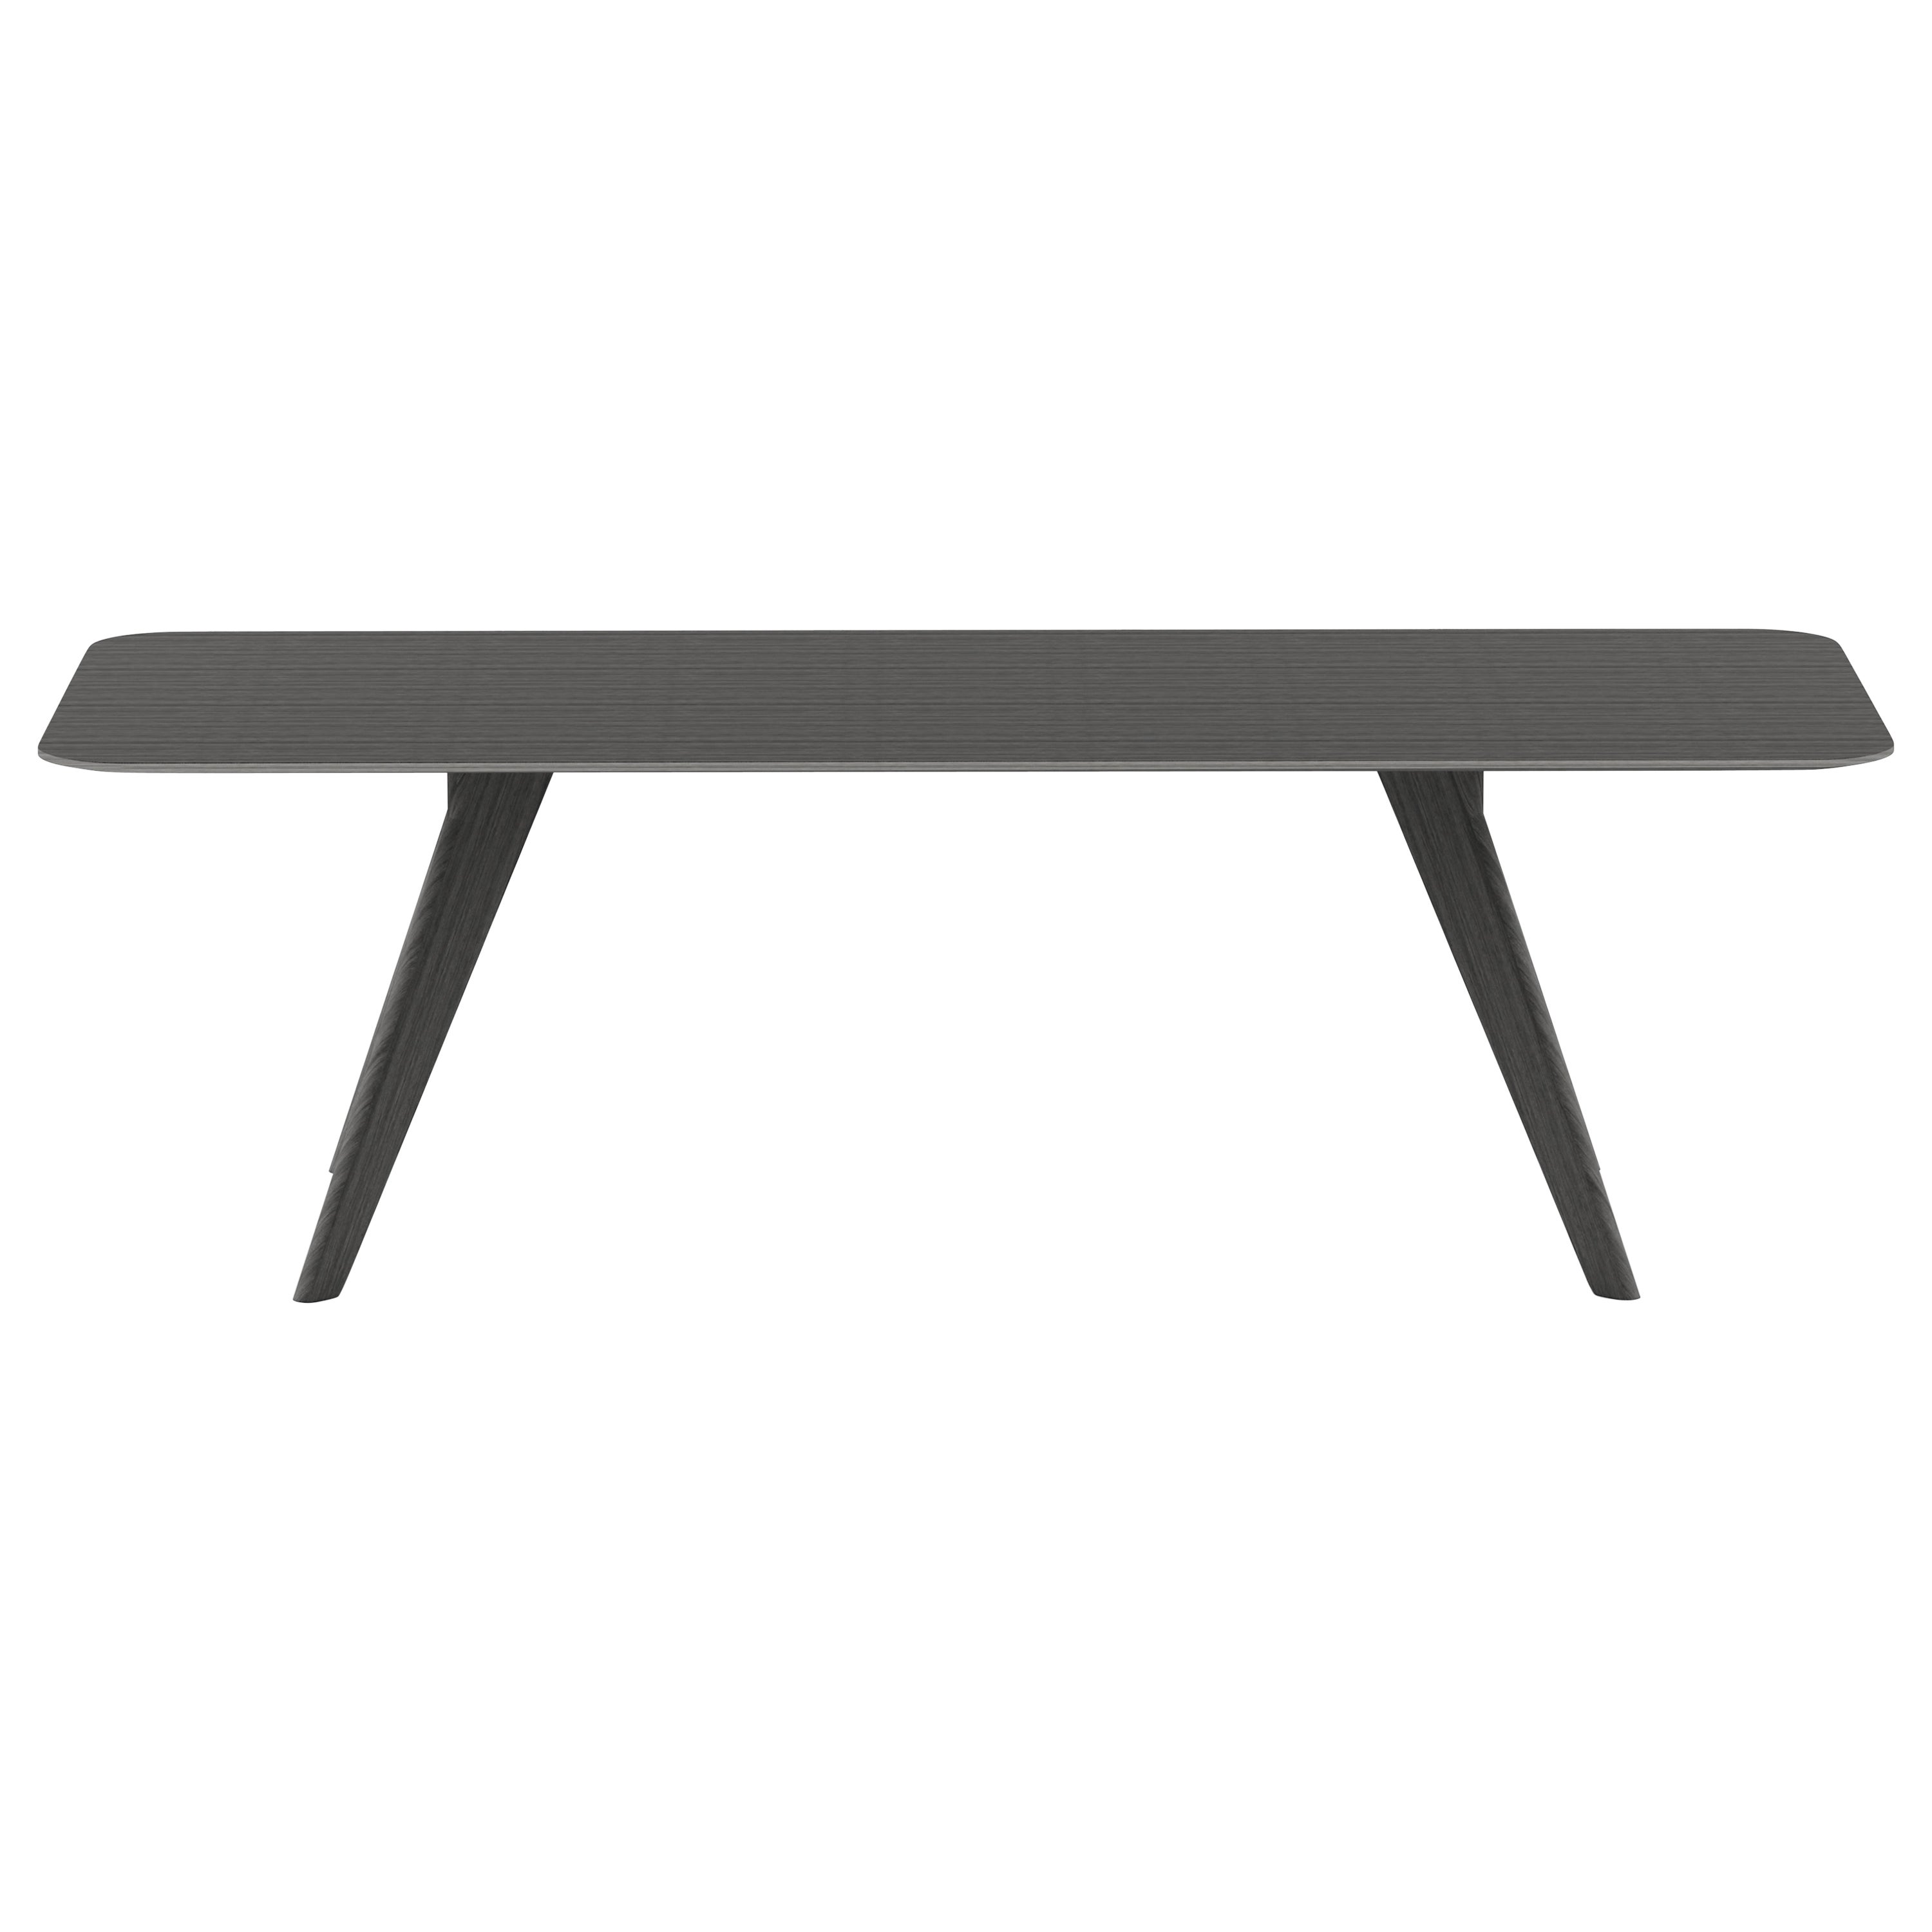 Alias AGO AG6 Rectangular Table with Grey Oak & Metal Frame in Lacquered Steel